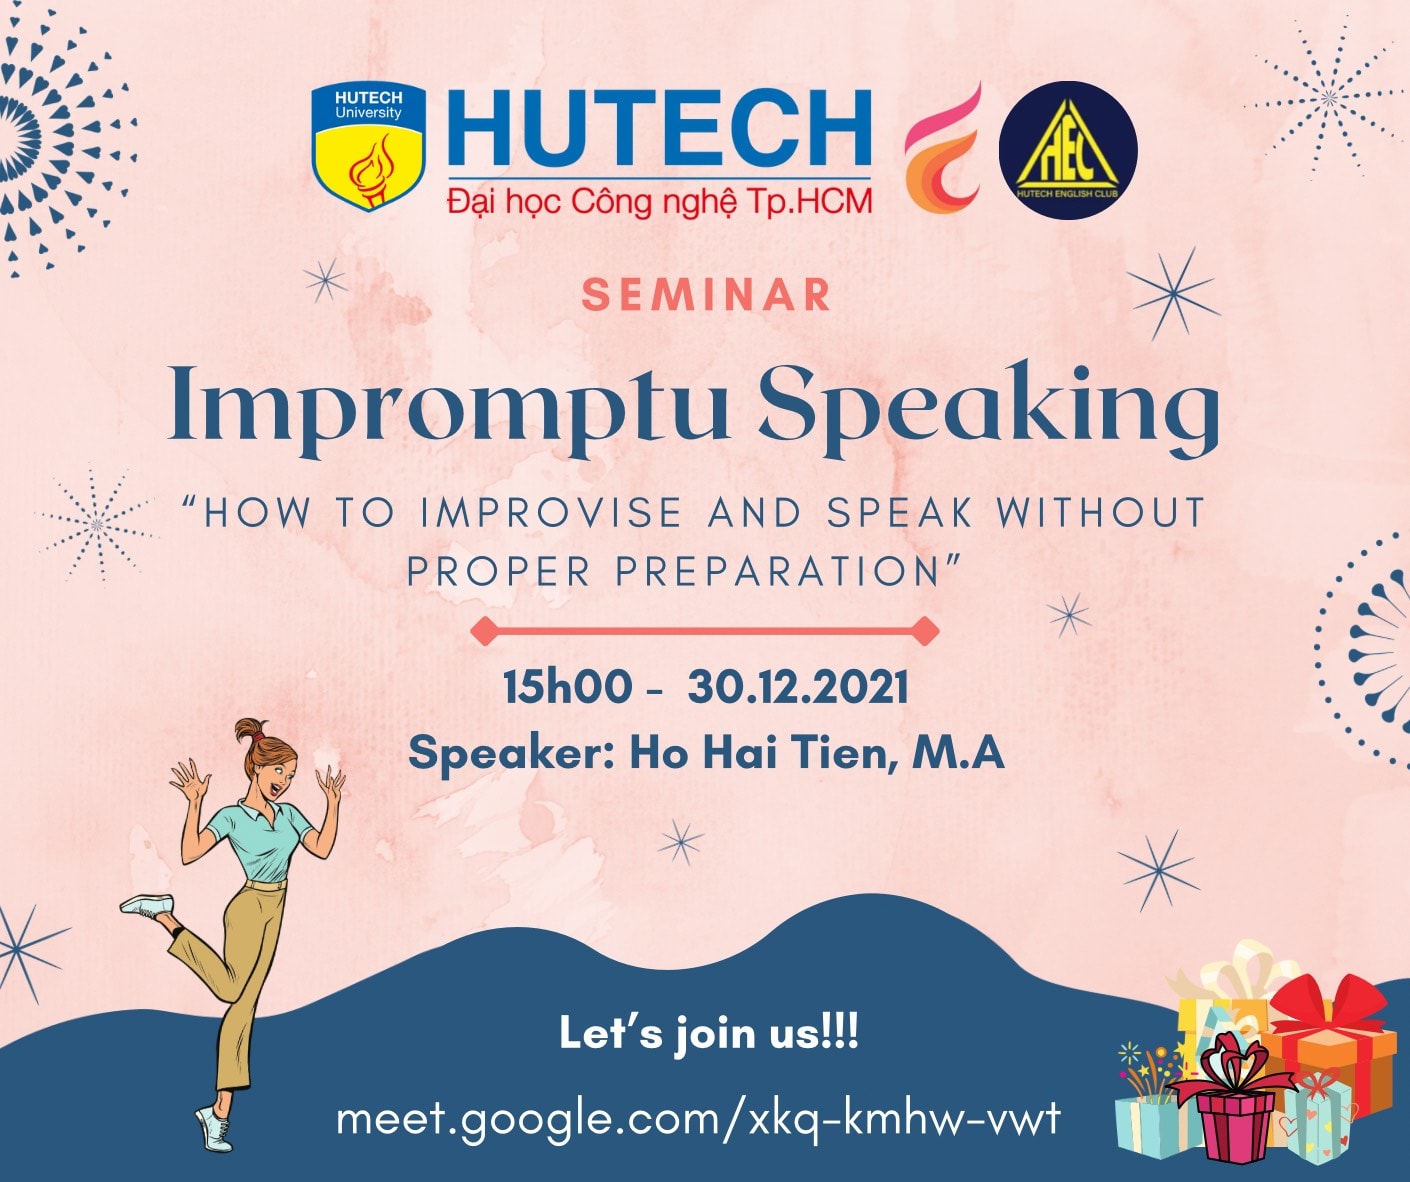 CLB HEC TỔ CHỨC 2 HỘI THẢO "HỘI THẢO “IMPROMPTU SPEAKING: "HOW TO IMPROVISE AND SPEAK WITHOUT PROPER PREPARATION” VÀ “THE APPLICATION OF ICT IN LANGUAGE TEACHING” 17